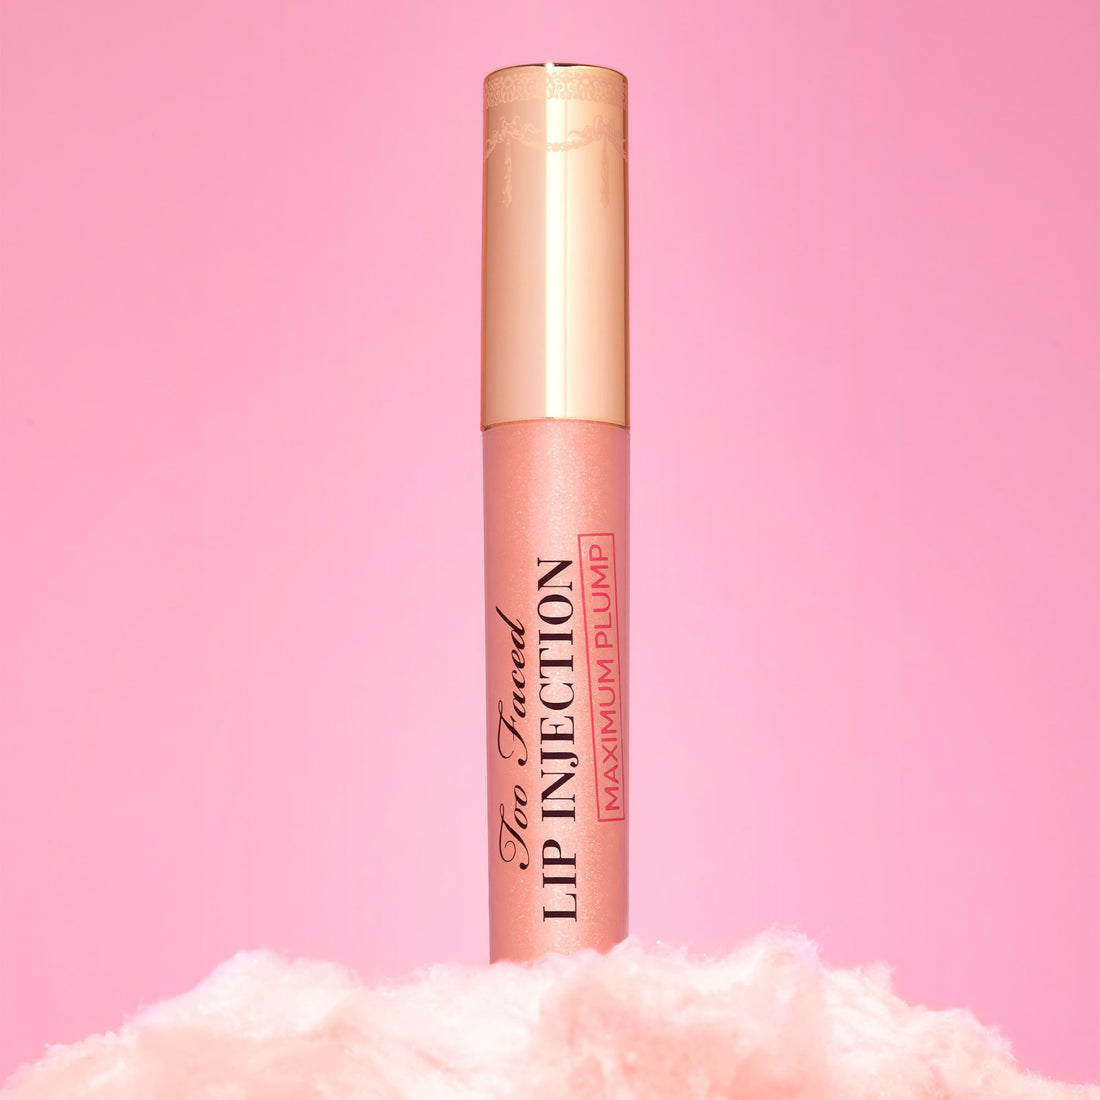 Lip Injection Maximum Plump Extra Strength Lip Plumper Gloss/ Cotton Candy Kisses - Too Faced.